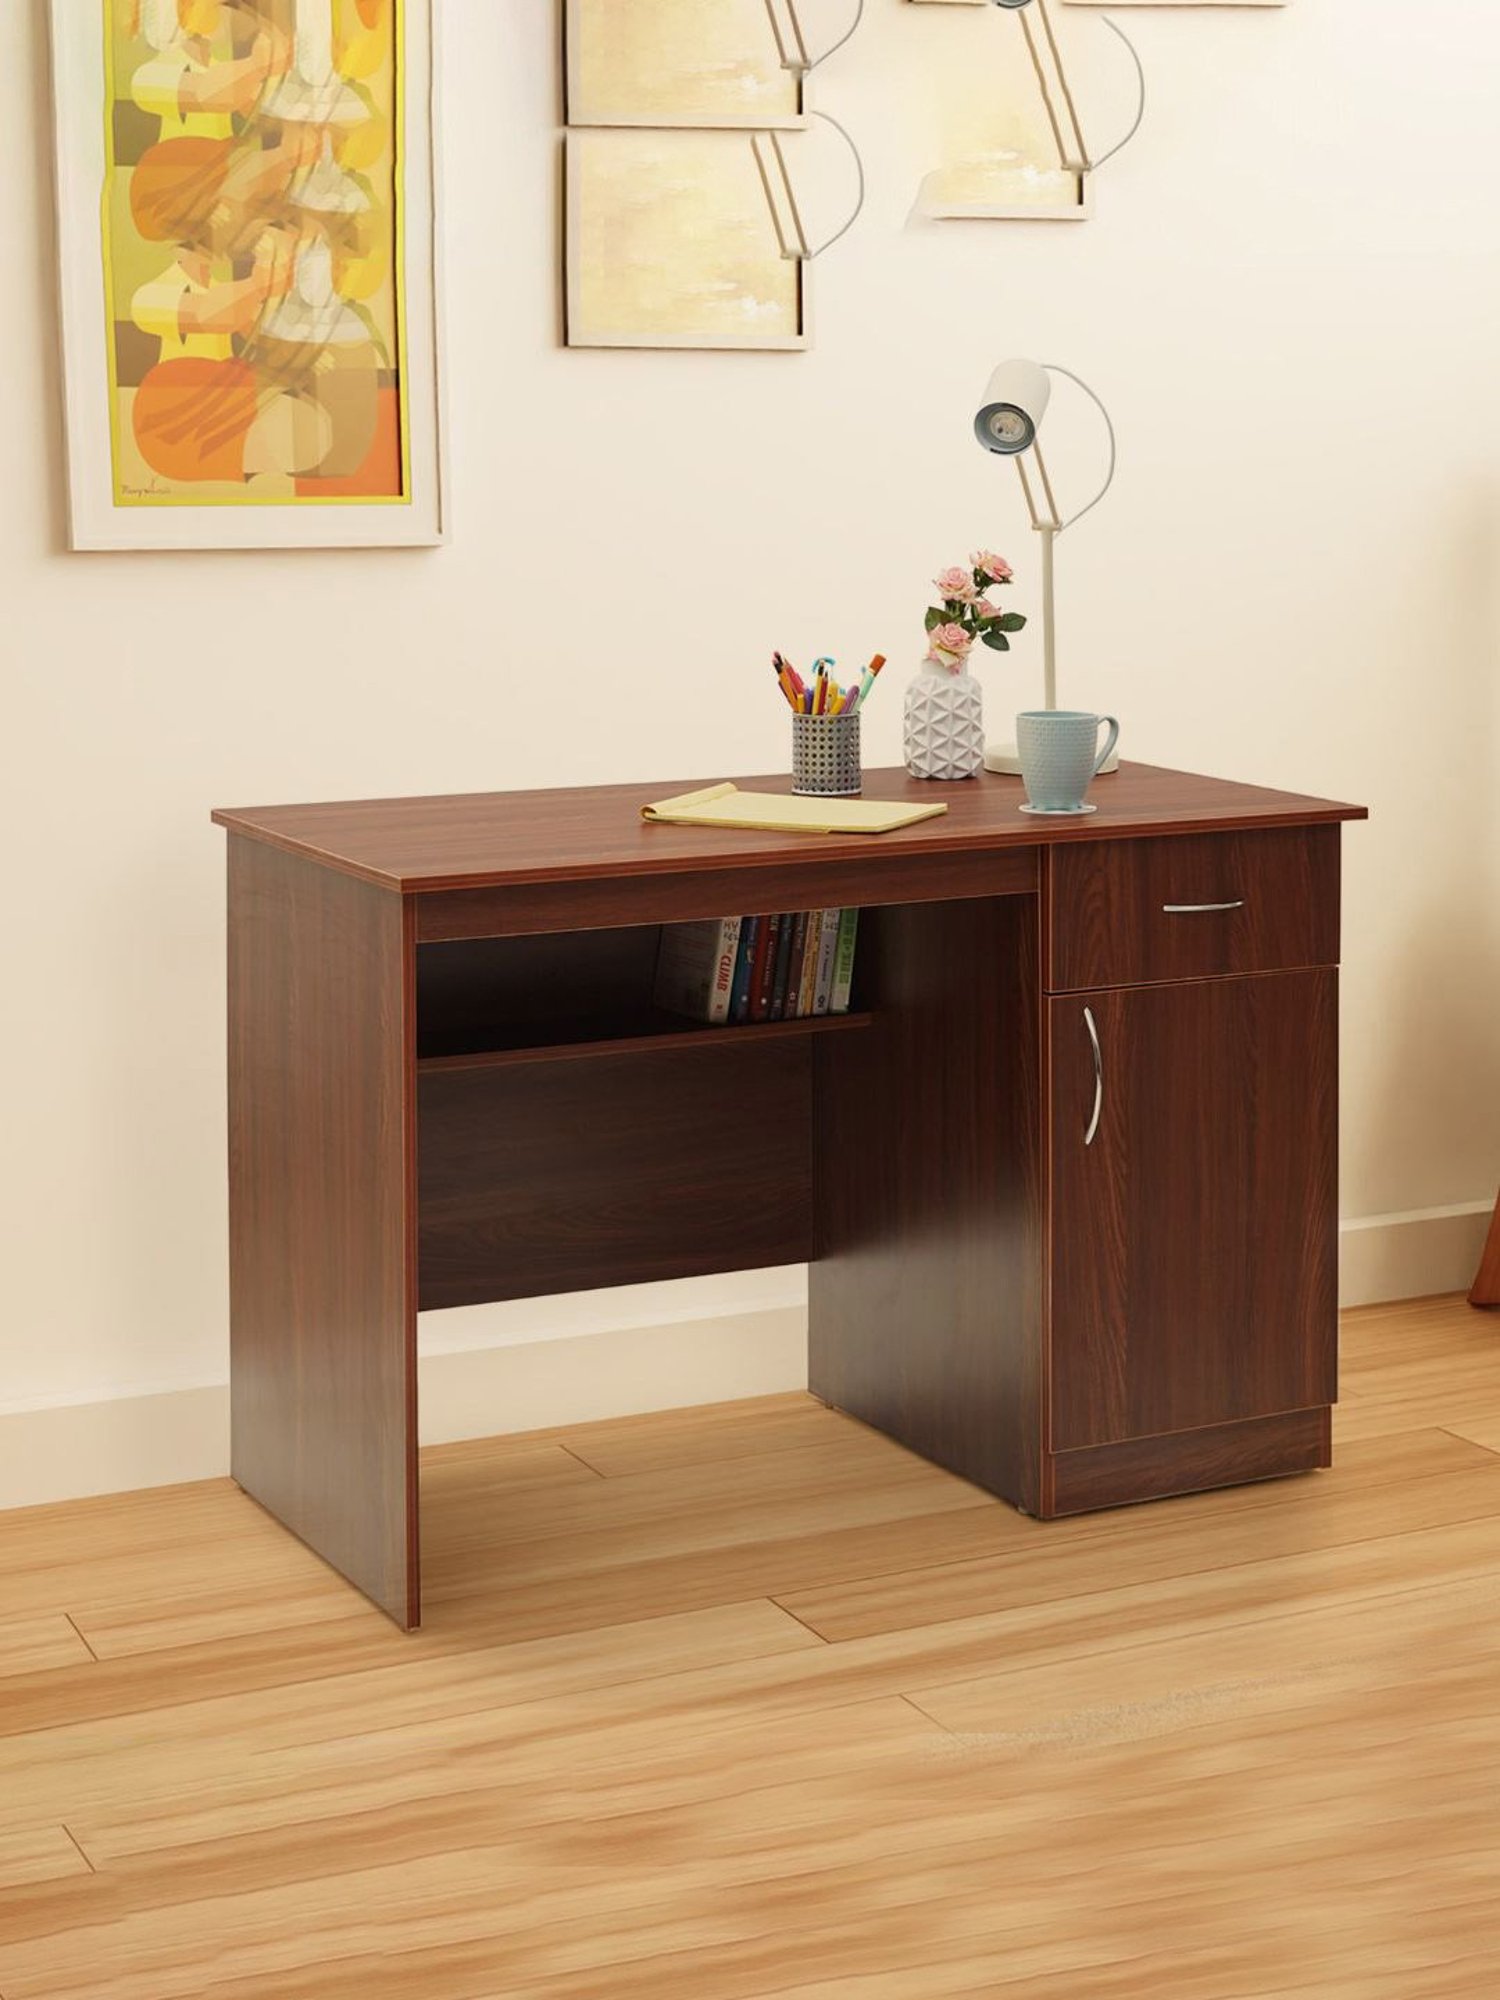 Home Full Engineered Wood Study Table Price in India - Buy Home Full  Engineered Wood Study Table online at